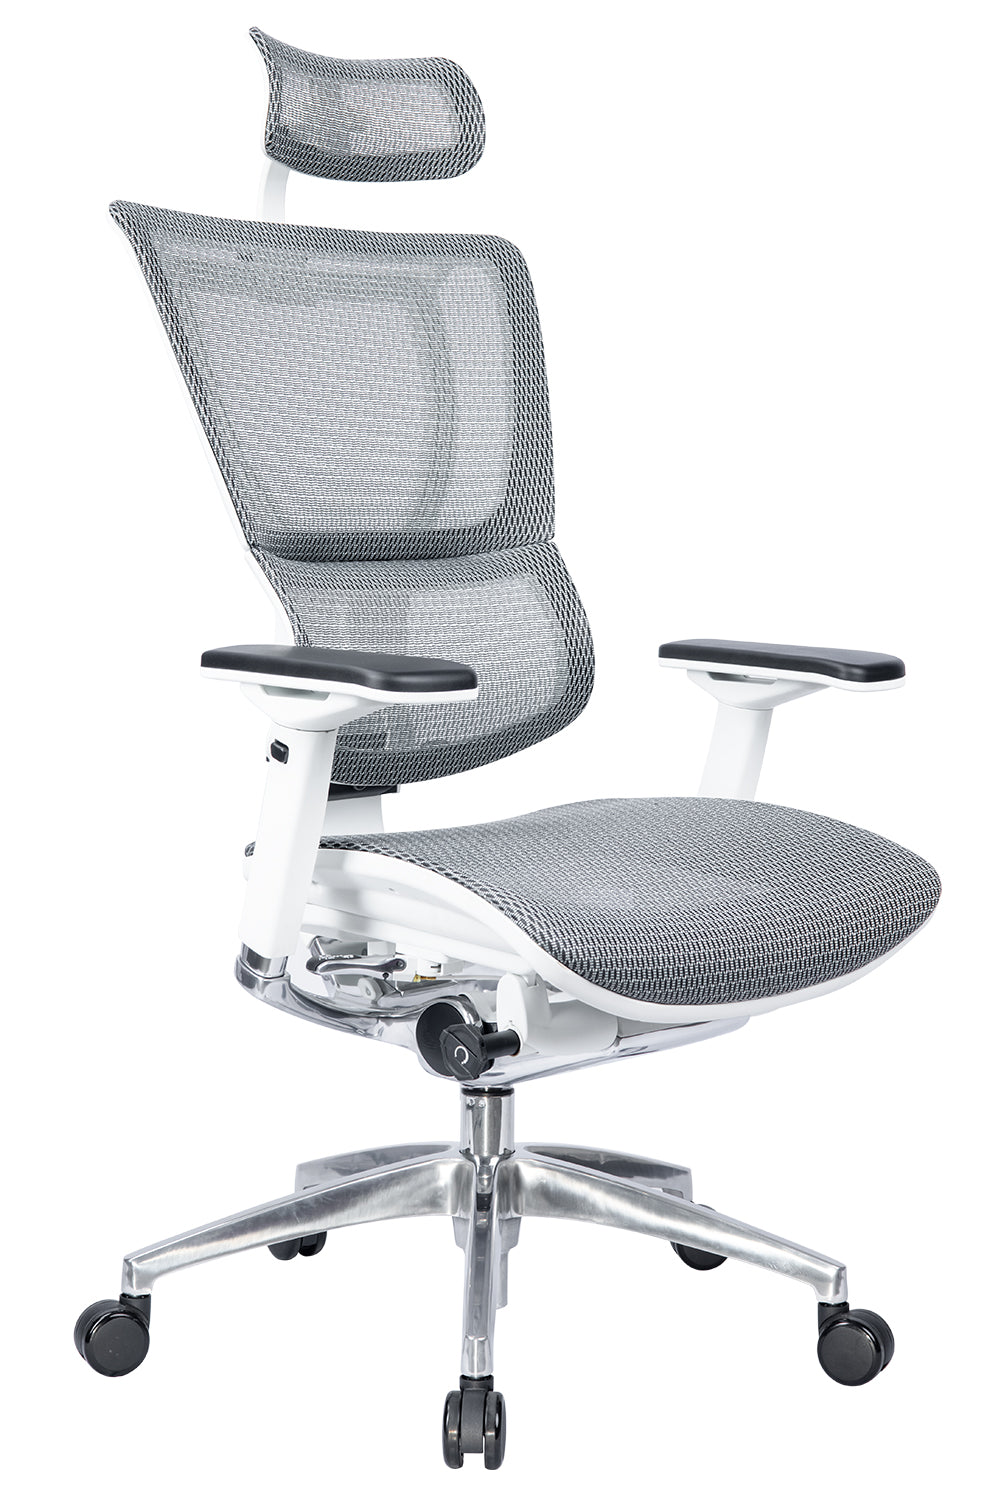 Travis High Back Office With Mesh Seat, 5D Armrest And Aluminum die cast Base - Grey